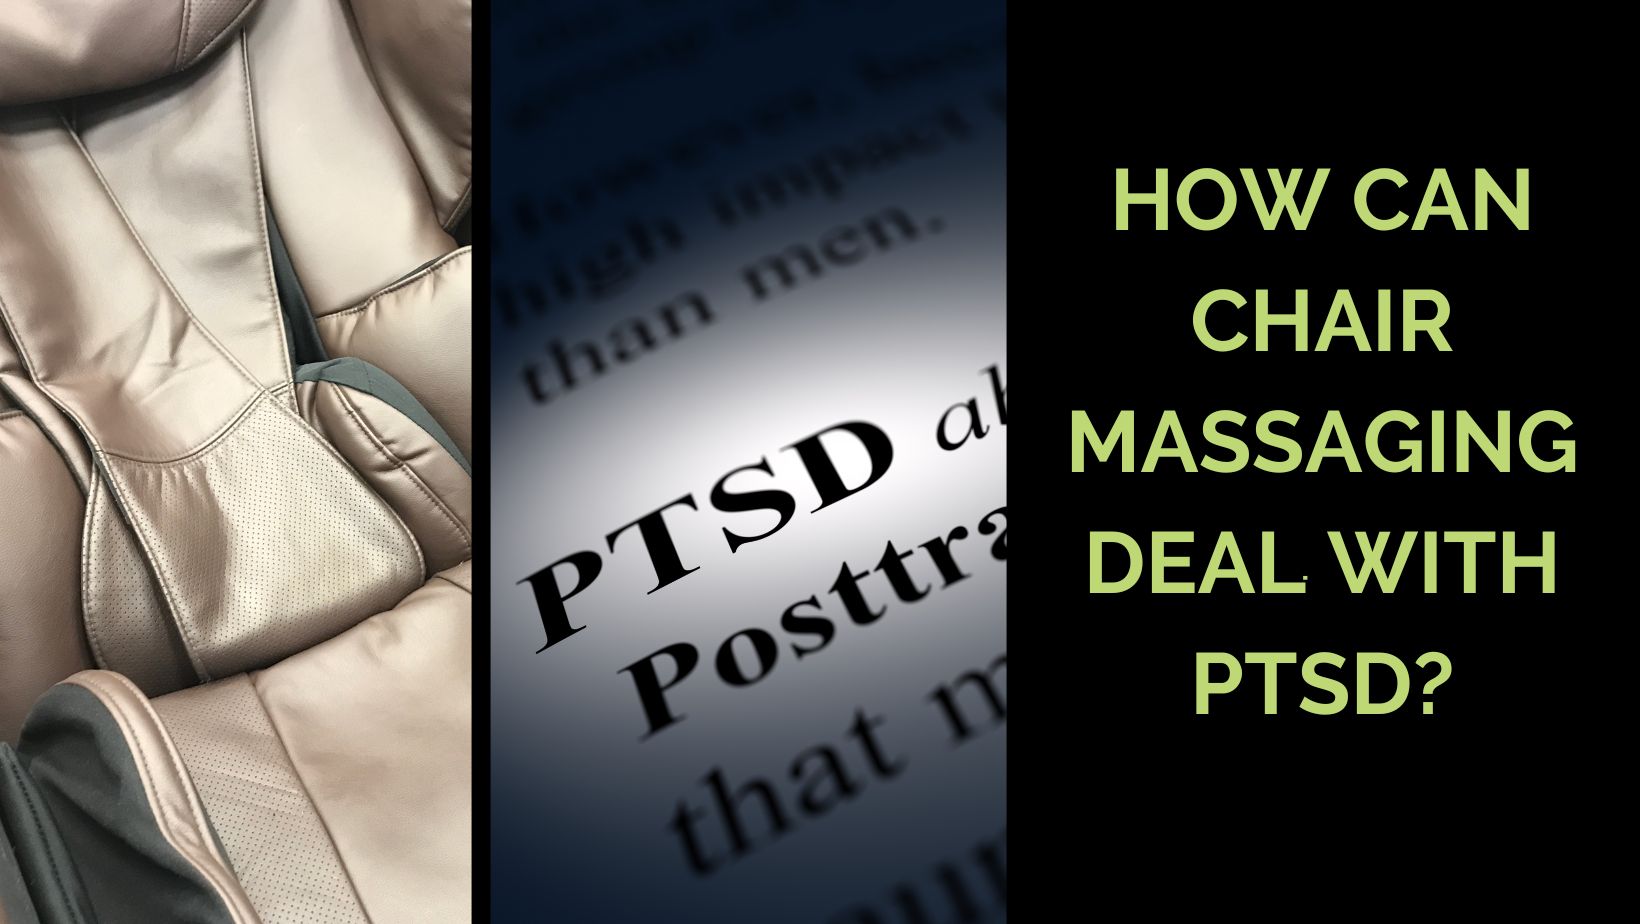 How Can Chair Massaging Deal With PTSD